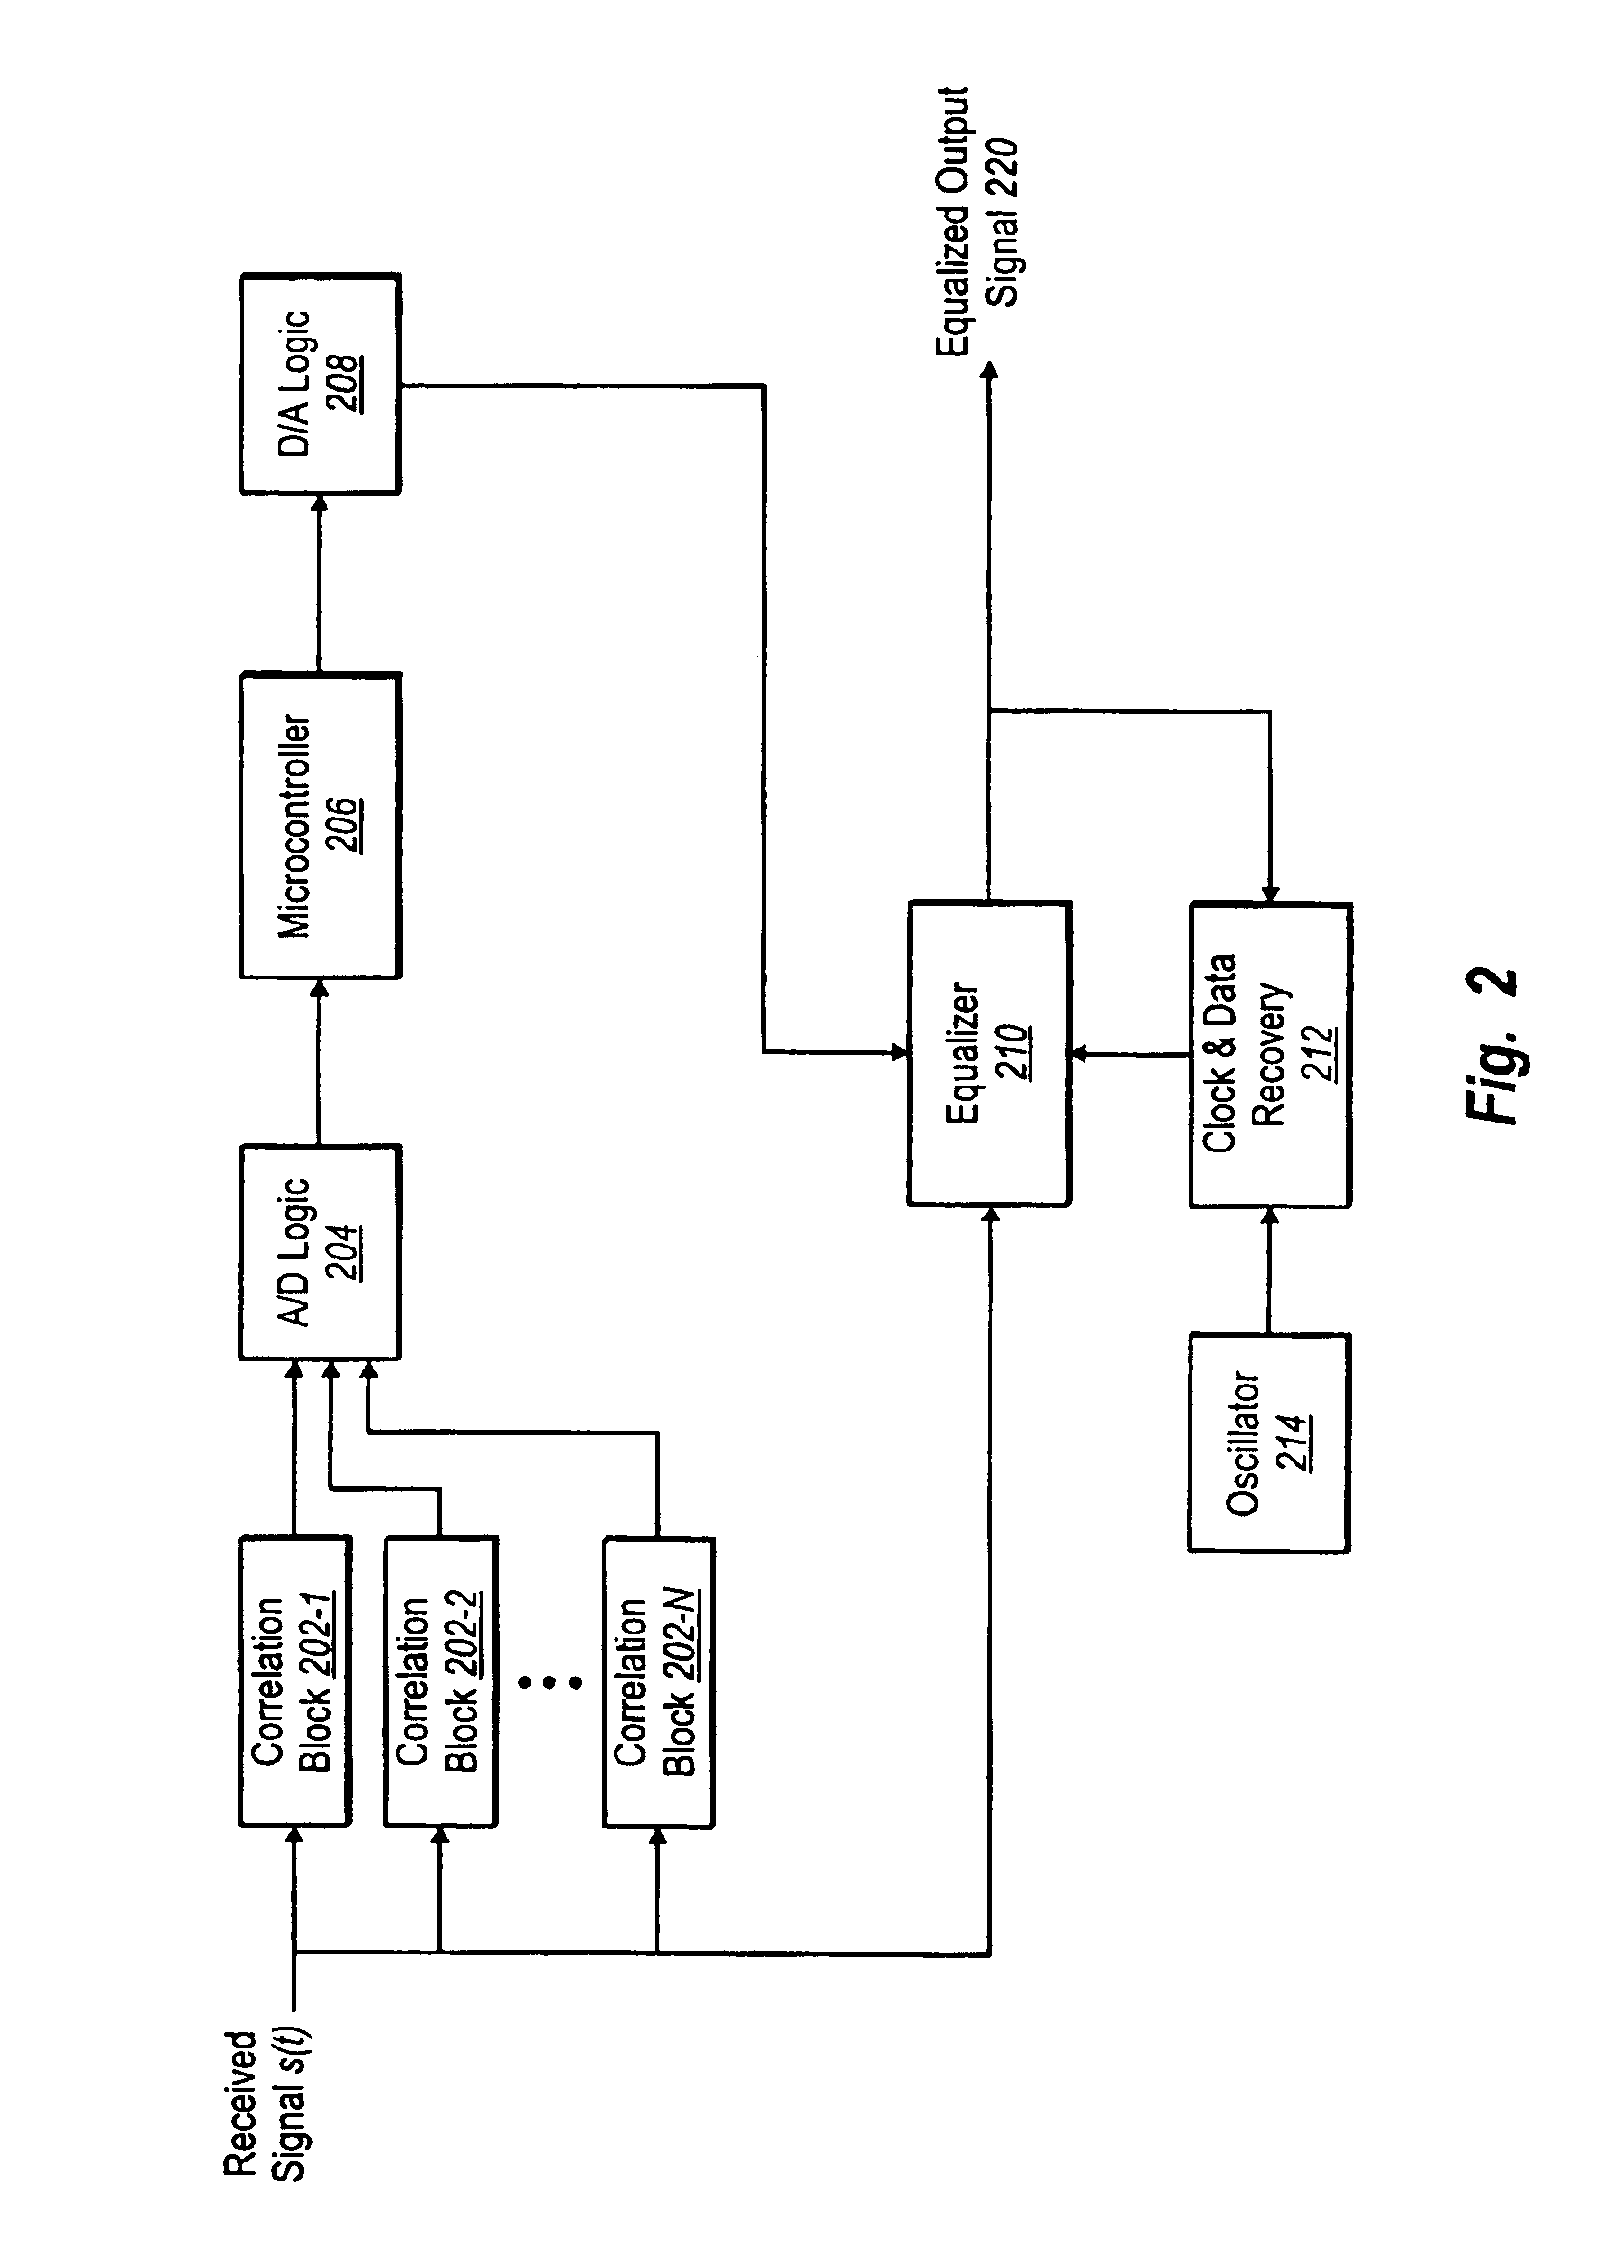 Method and apparatus for reducing interference in a data stream using autocorrelation derived equalization